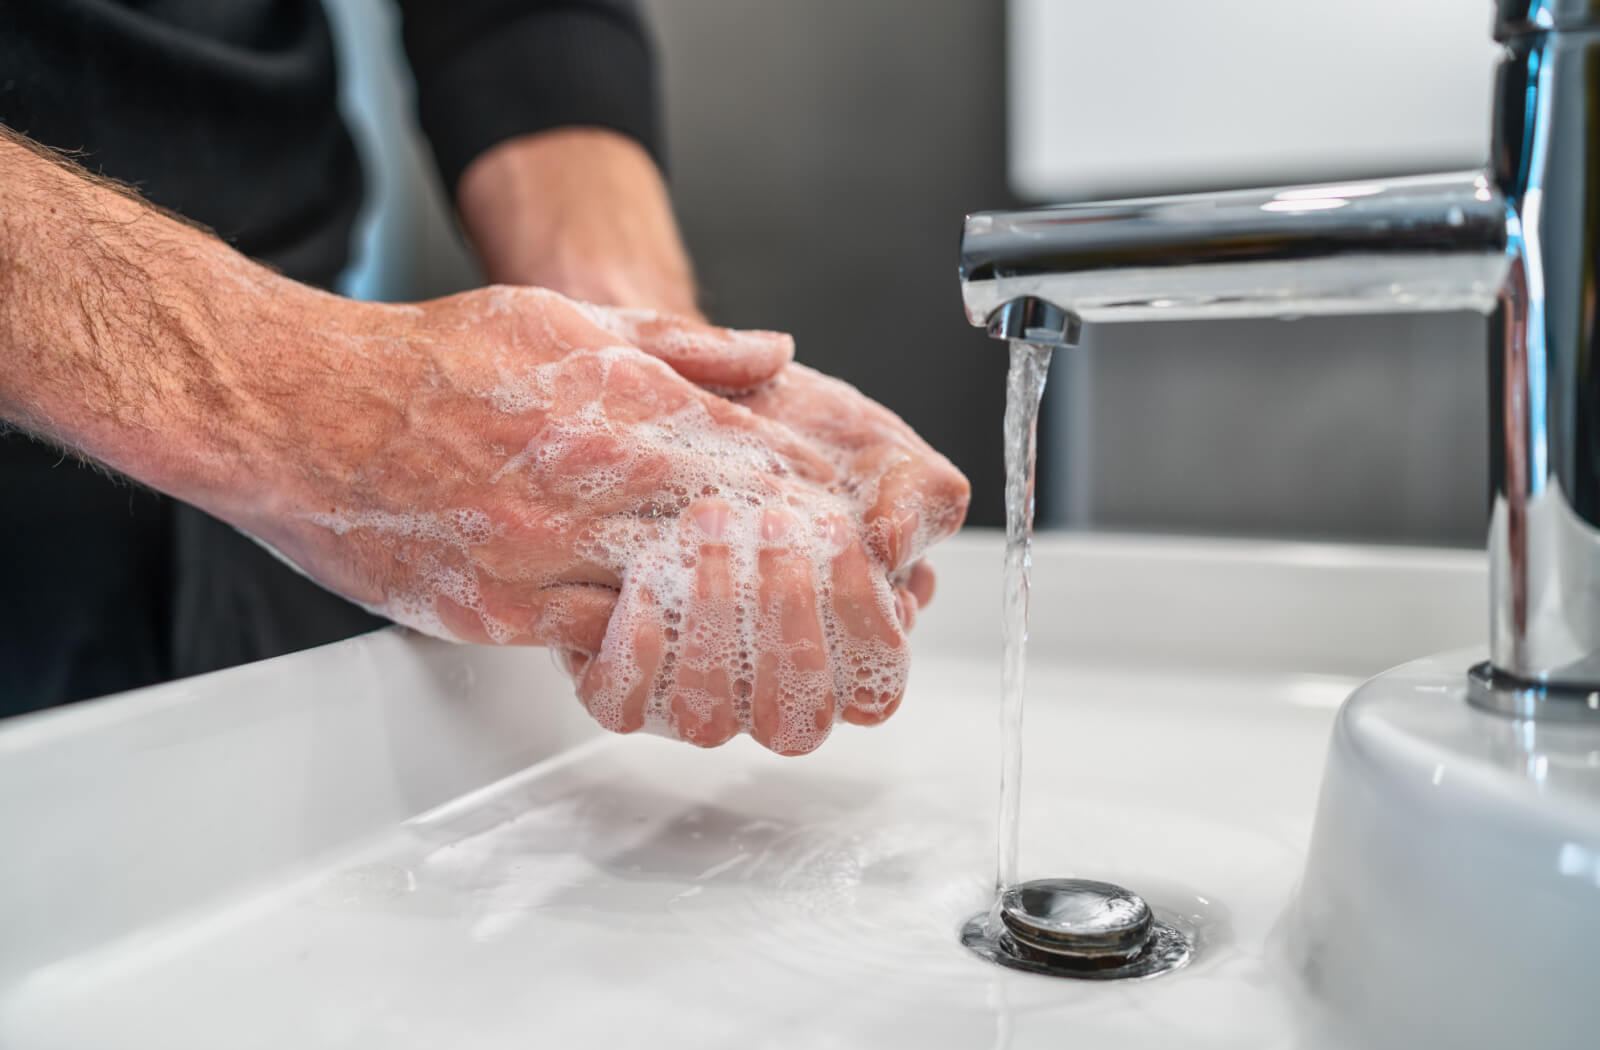 A man washing his hands using soap and water.